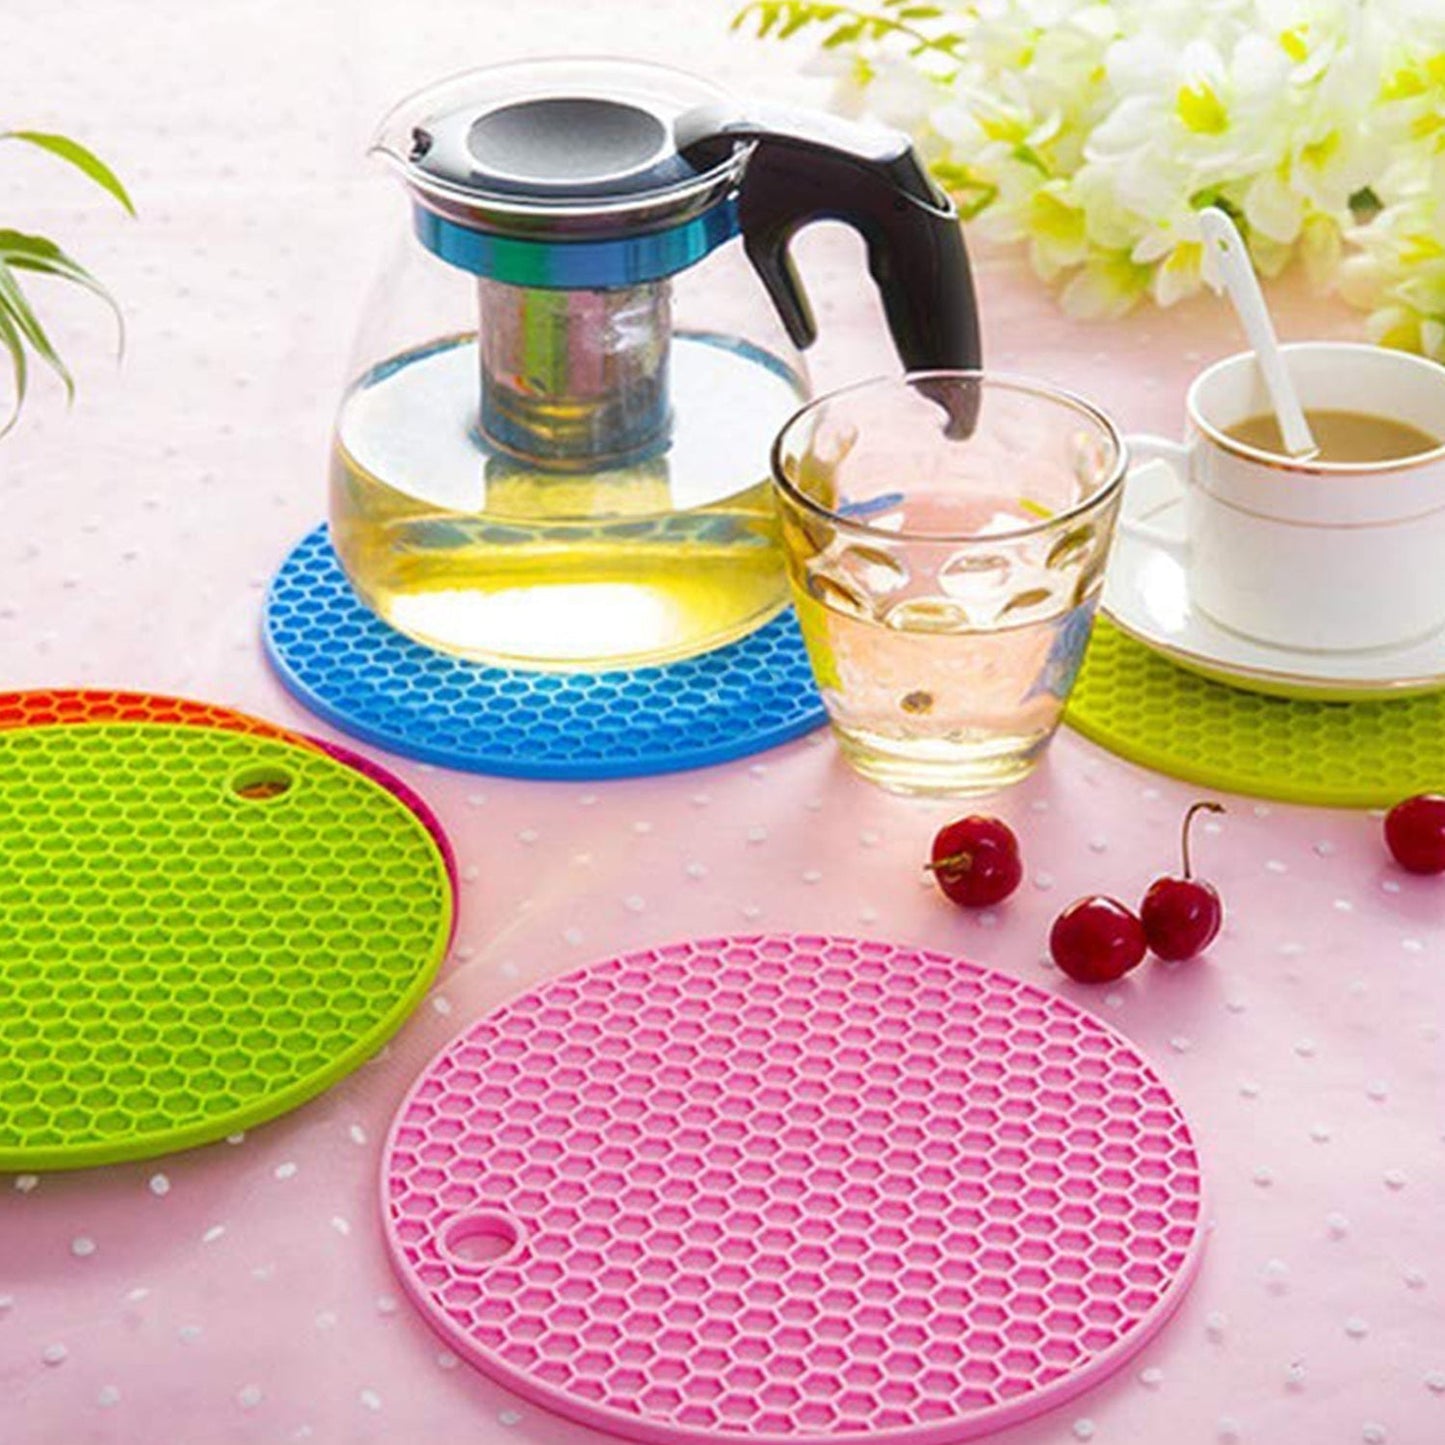 4846 4 Pc Silicon Hot Mat For Placing Hot Vessels And Utensils Over It Easily Without Having Any Visible Marks On Surfaces. DeoDap